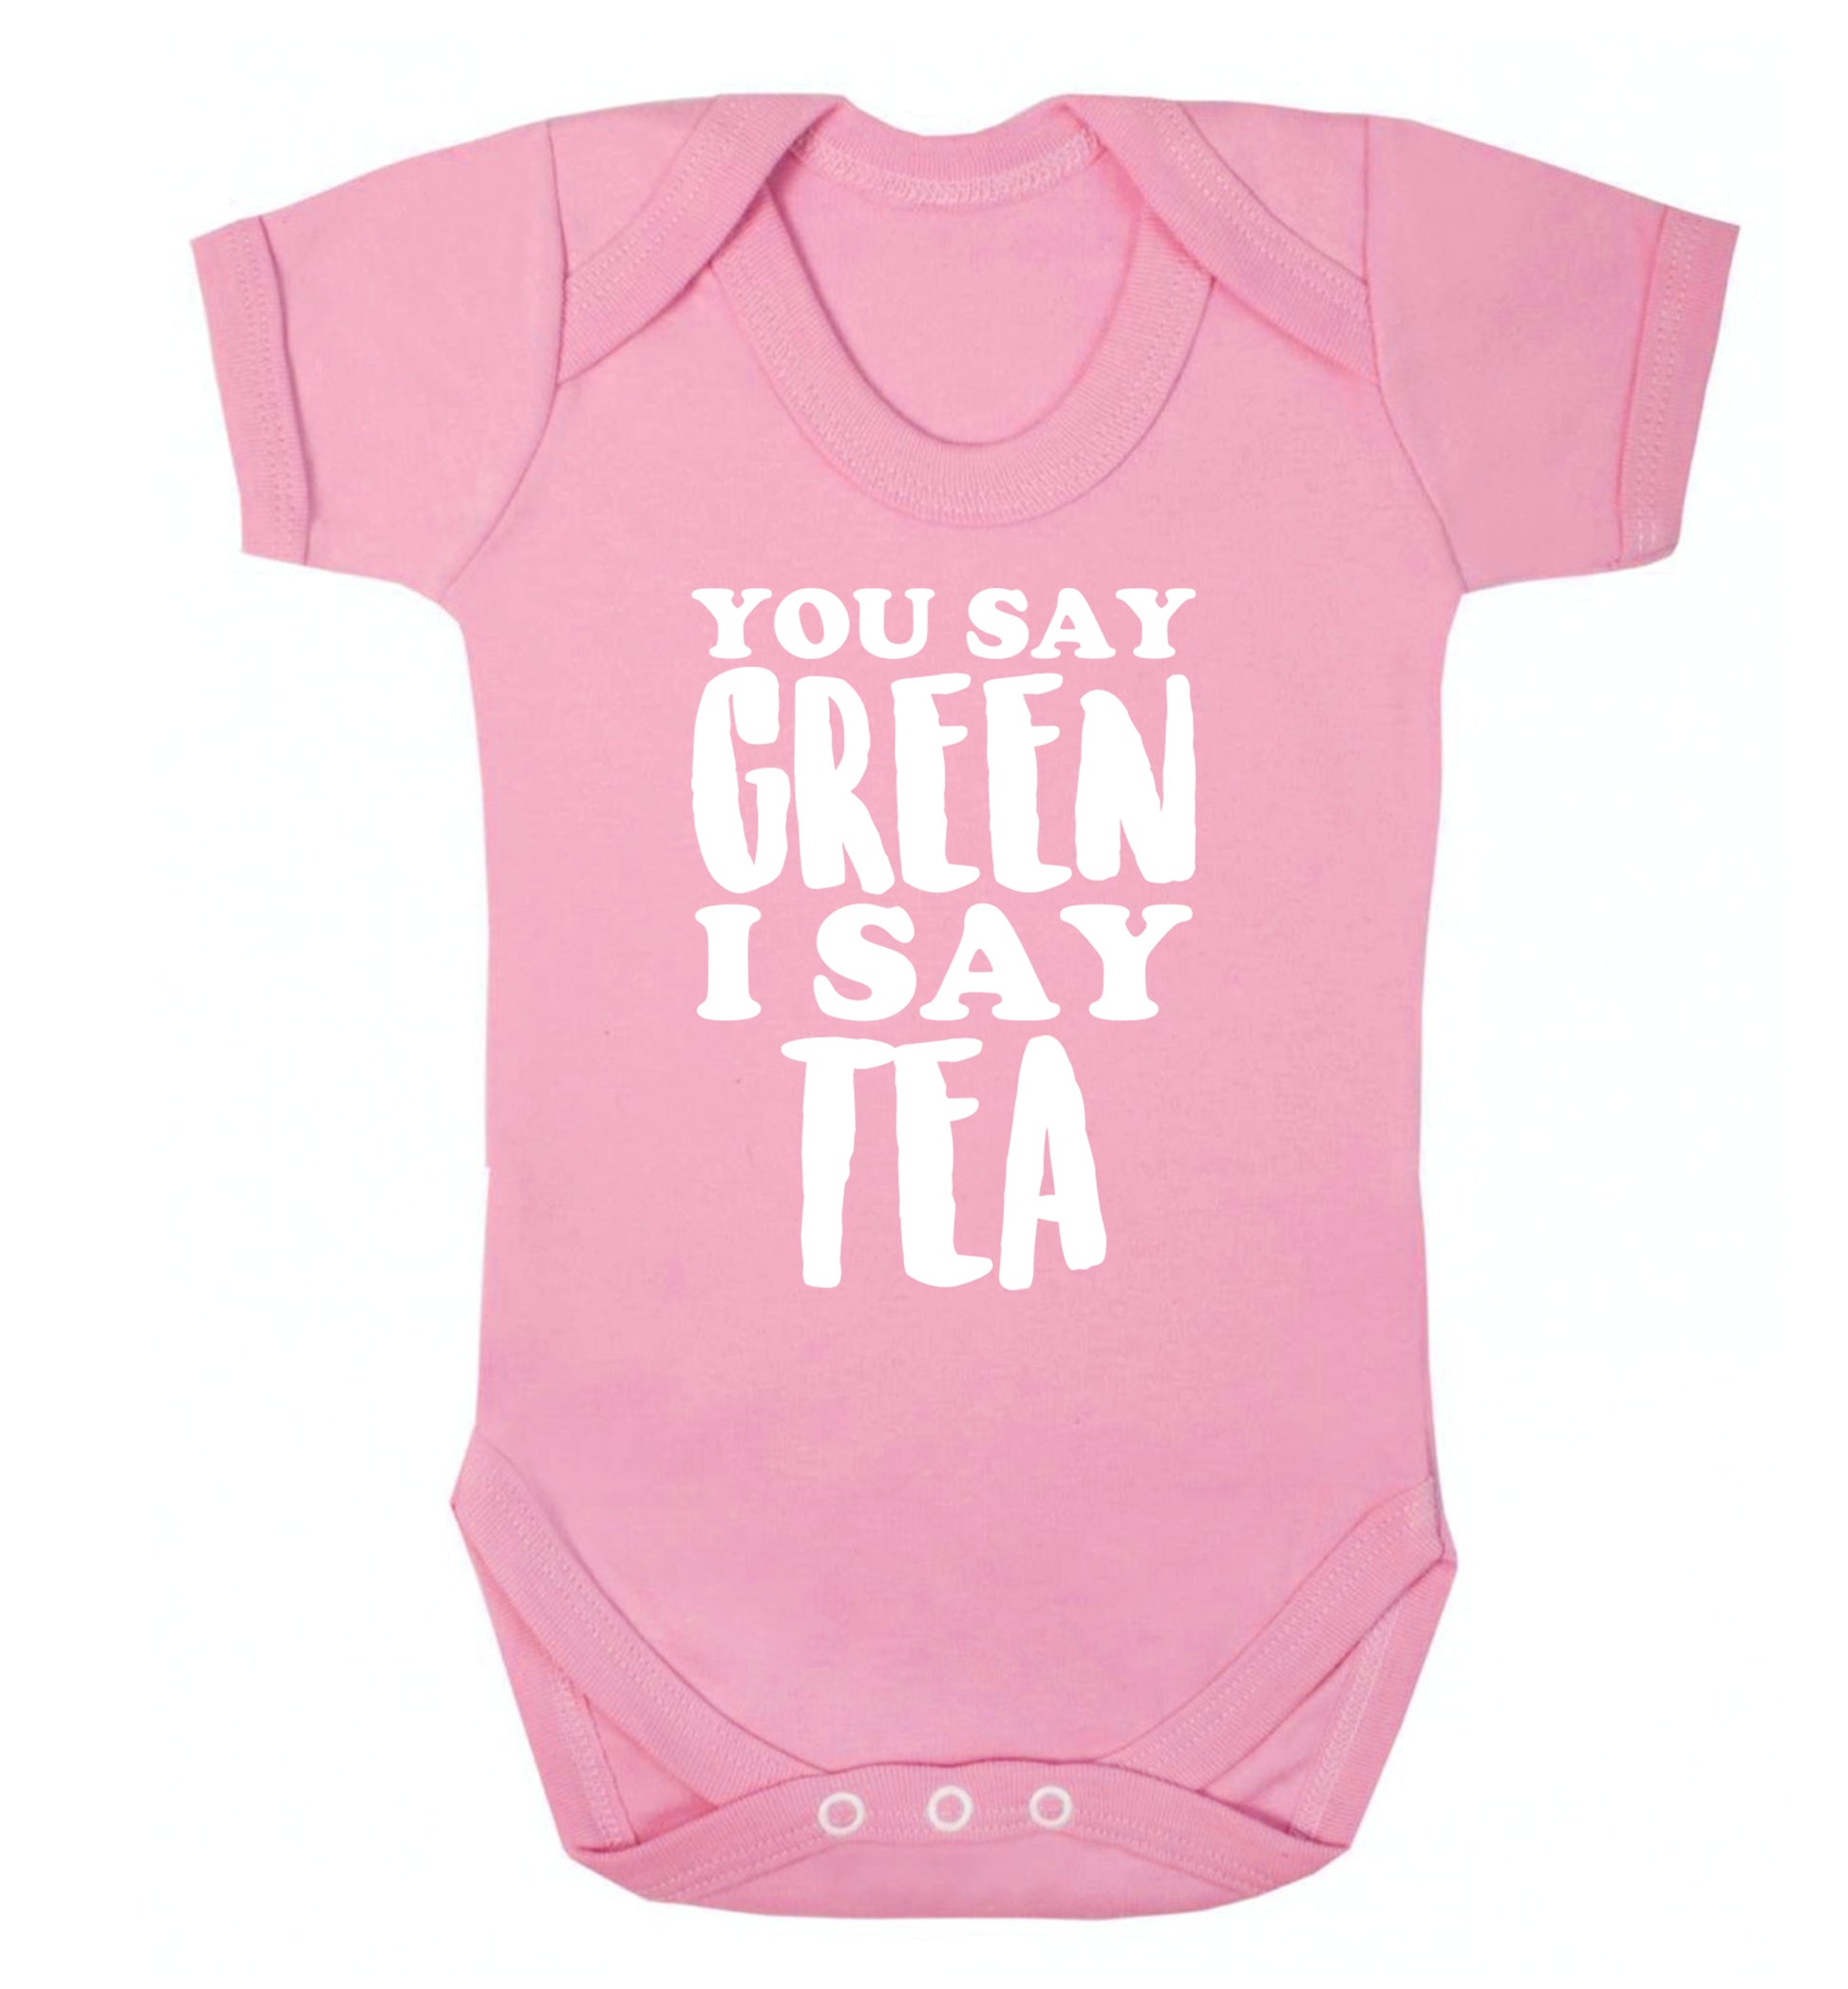 You say green I say tea! Baby Vest pale pink 18-24 months